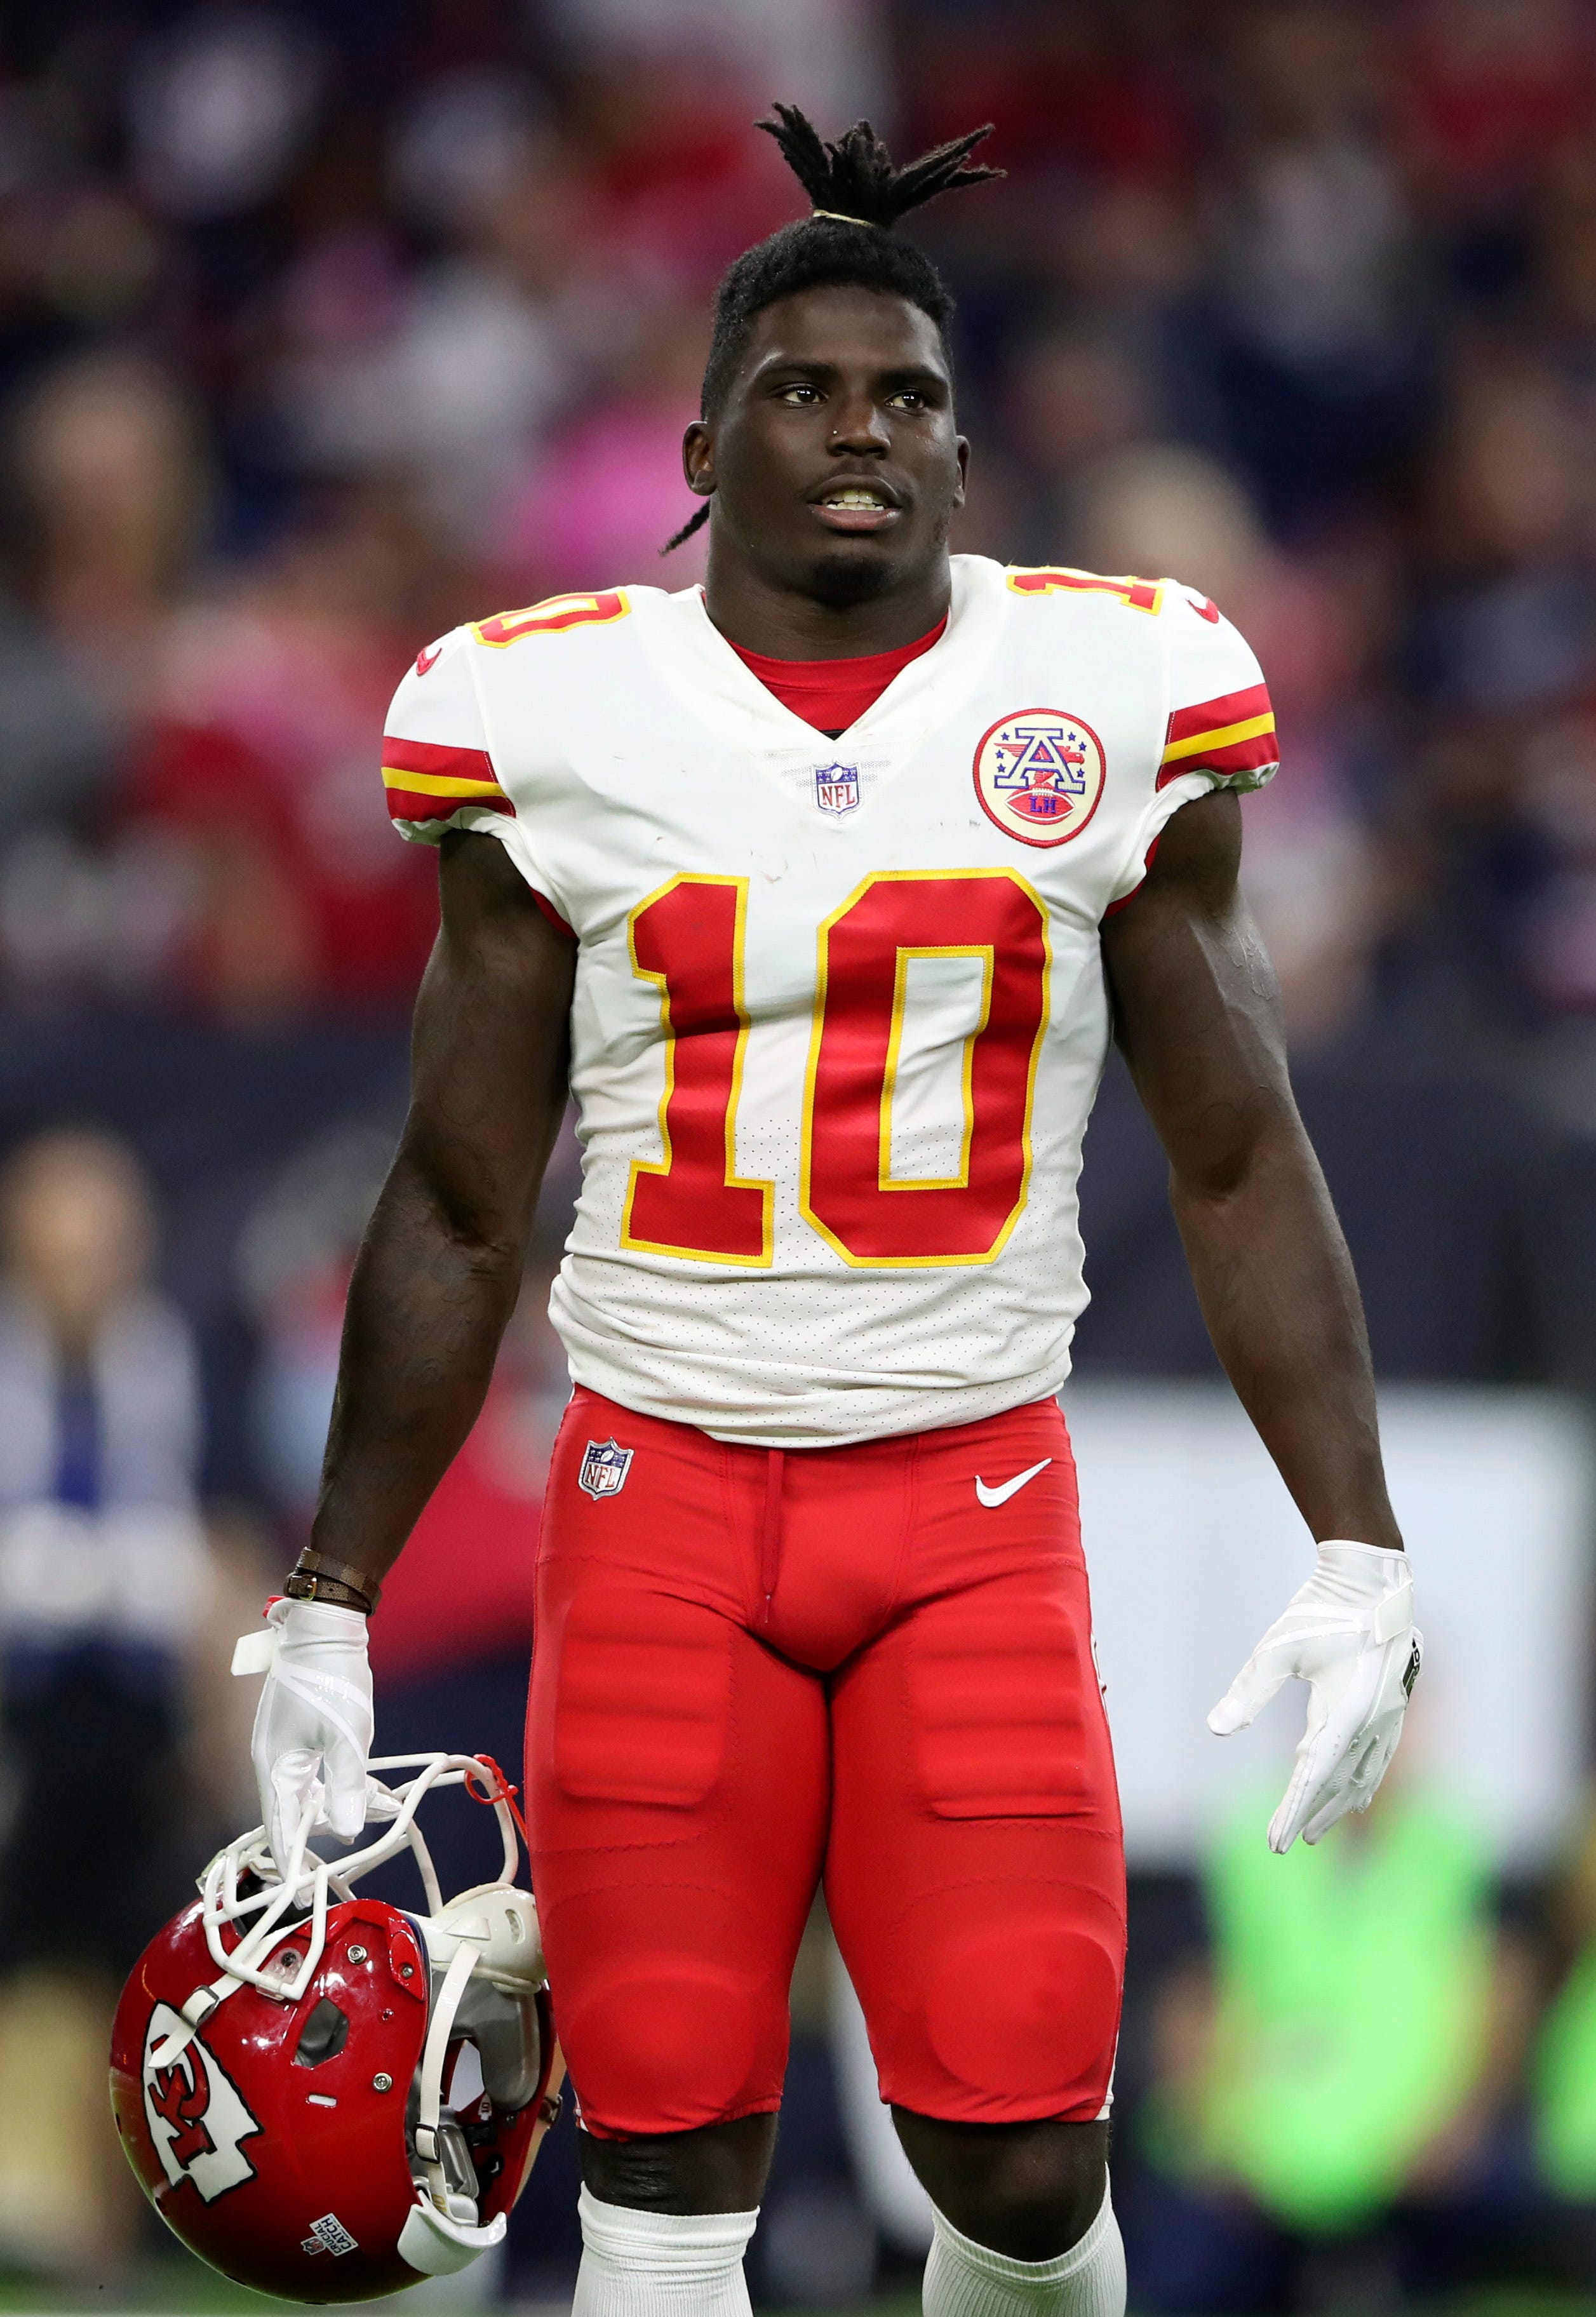 Tyreek Hill rumors, news and stories [Top 20+ latest articles]